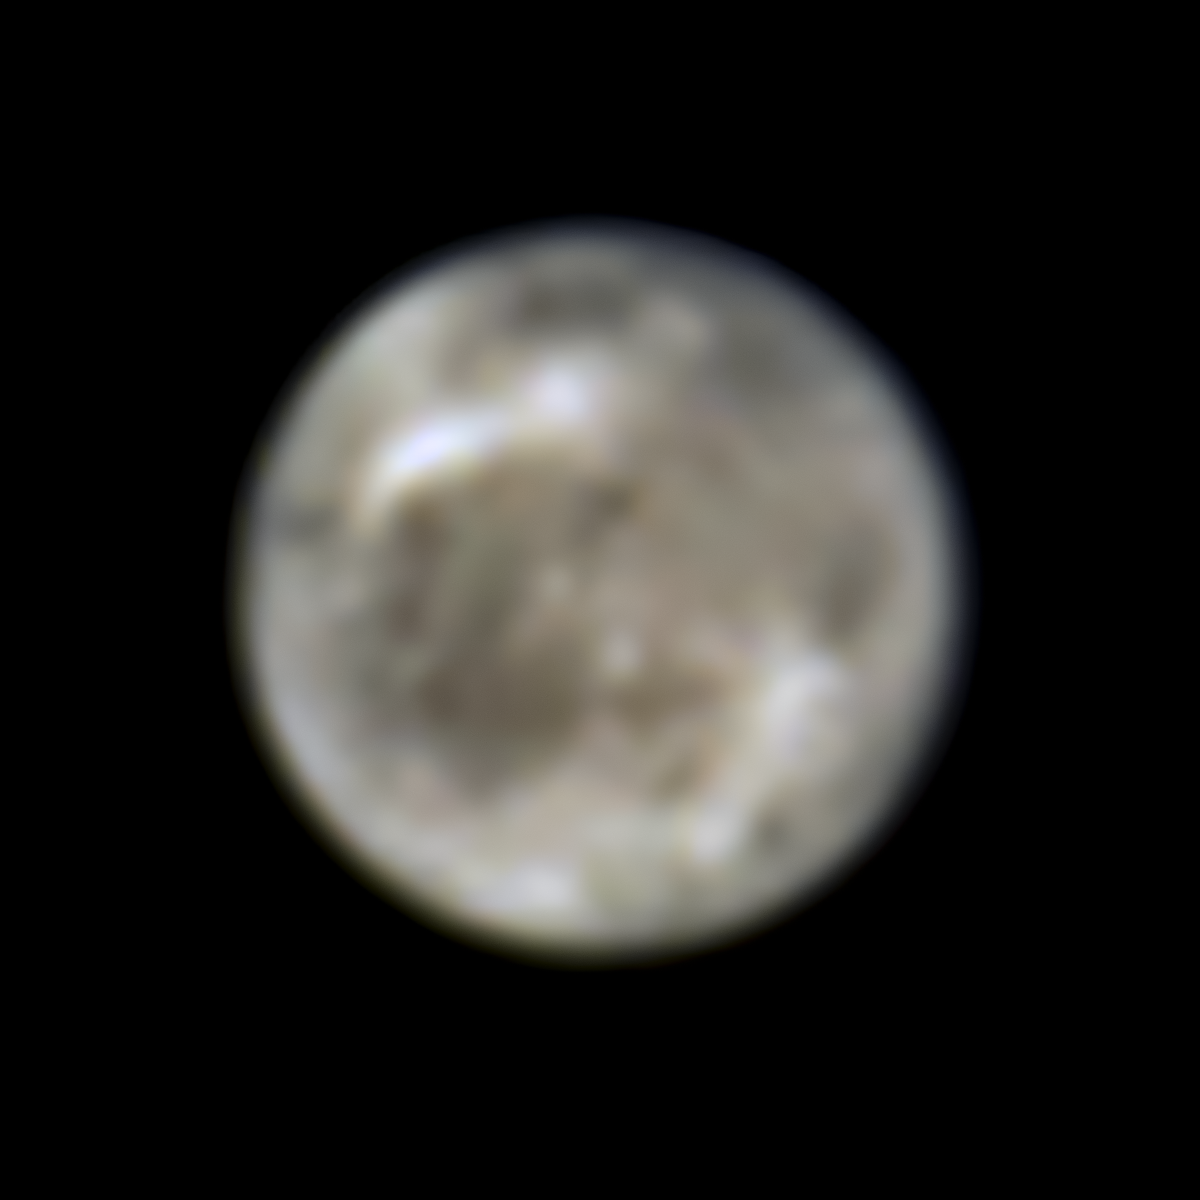 This image presents Jupiter's moon Ganymede as seen by the NASA's Hubble Space Telescope in 1996.